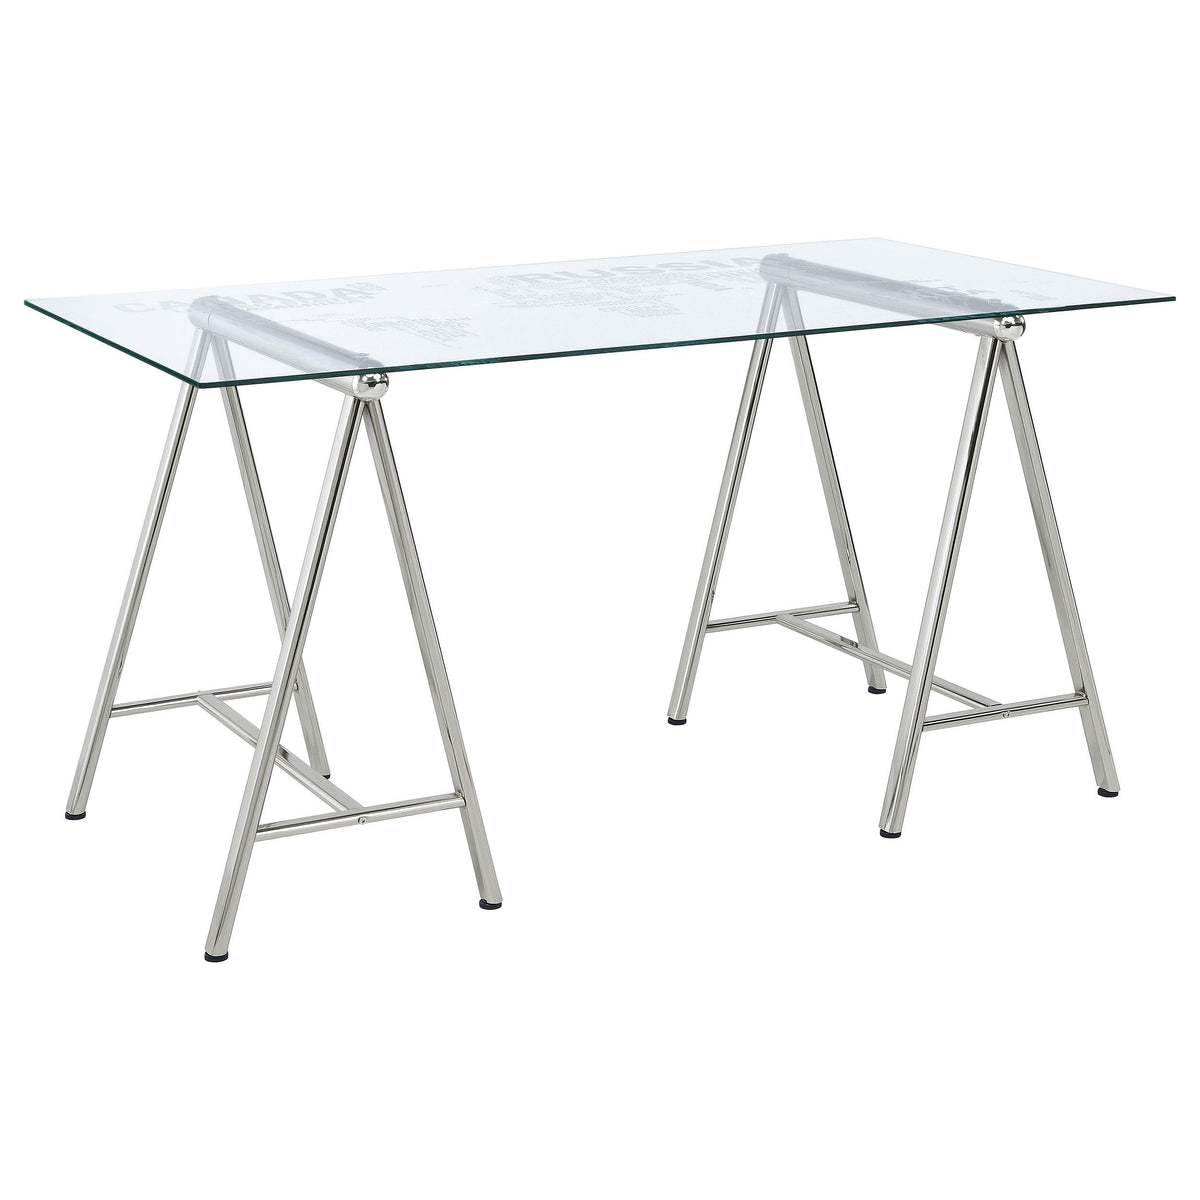 Patton World Map Writing Desk Nickel and Printed Clear Patton World Map Writing Desk Nickel and Printed Clear Half Price Furniture